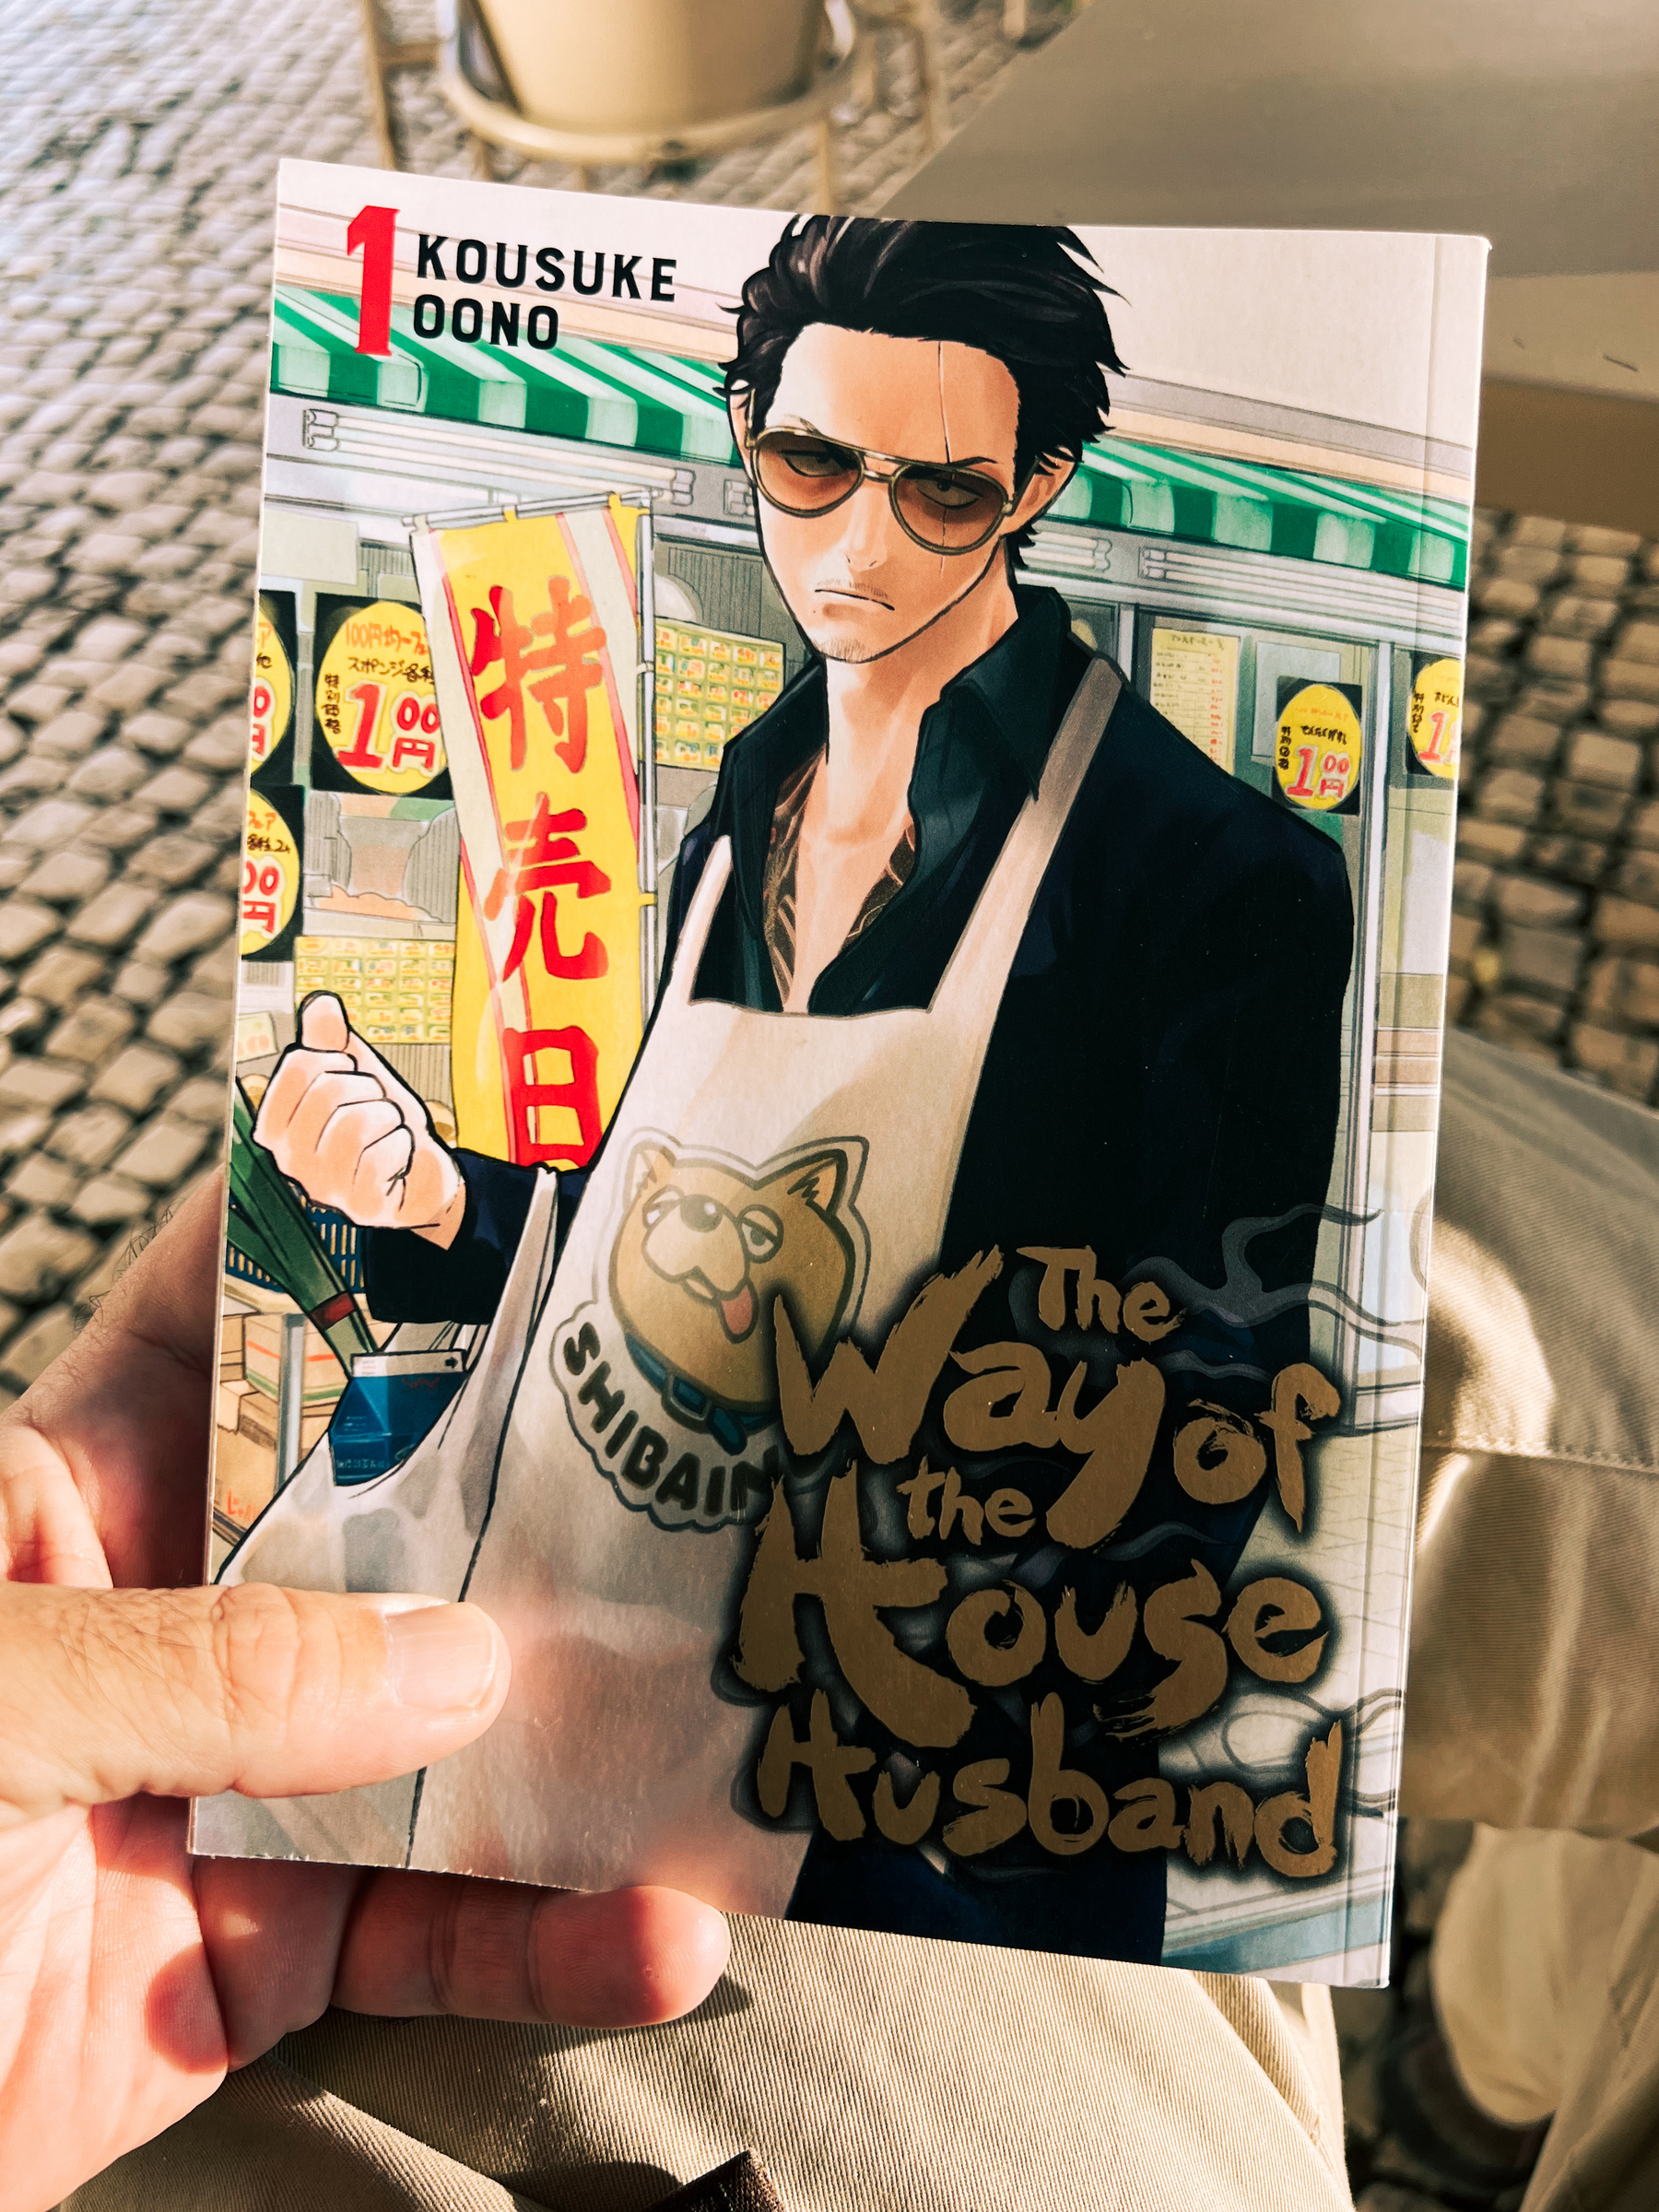 A book, Kousuke Oono&rsquo;s The Way of the Househusband, Volume 1.